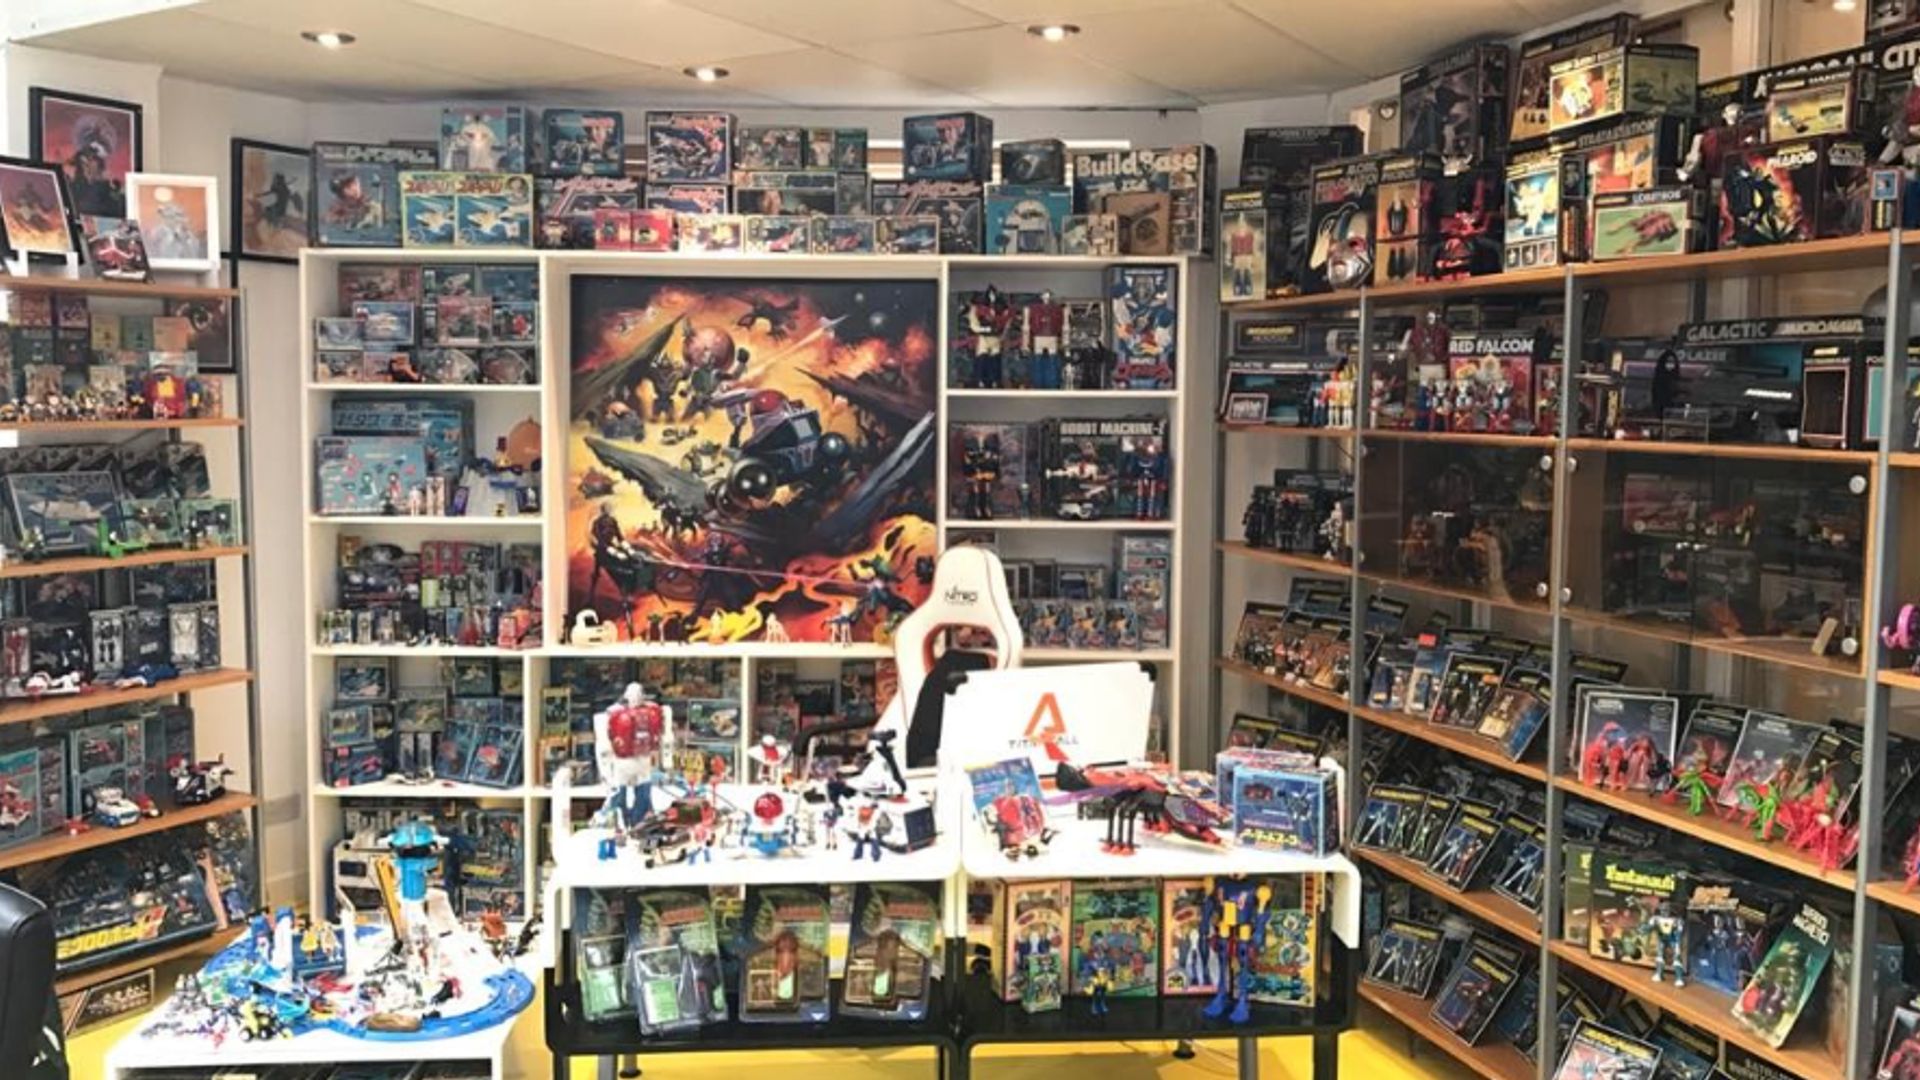 Several shelves and tables filled with movie memorabilia